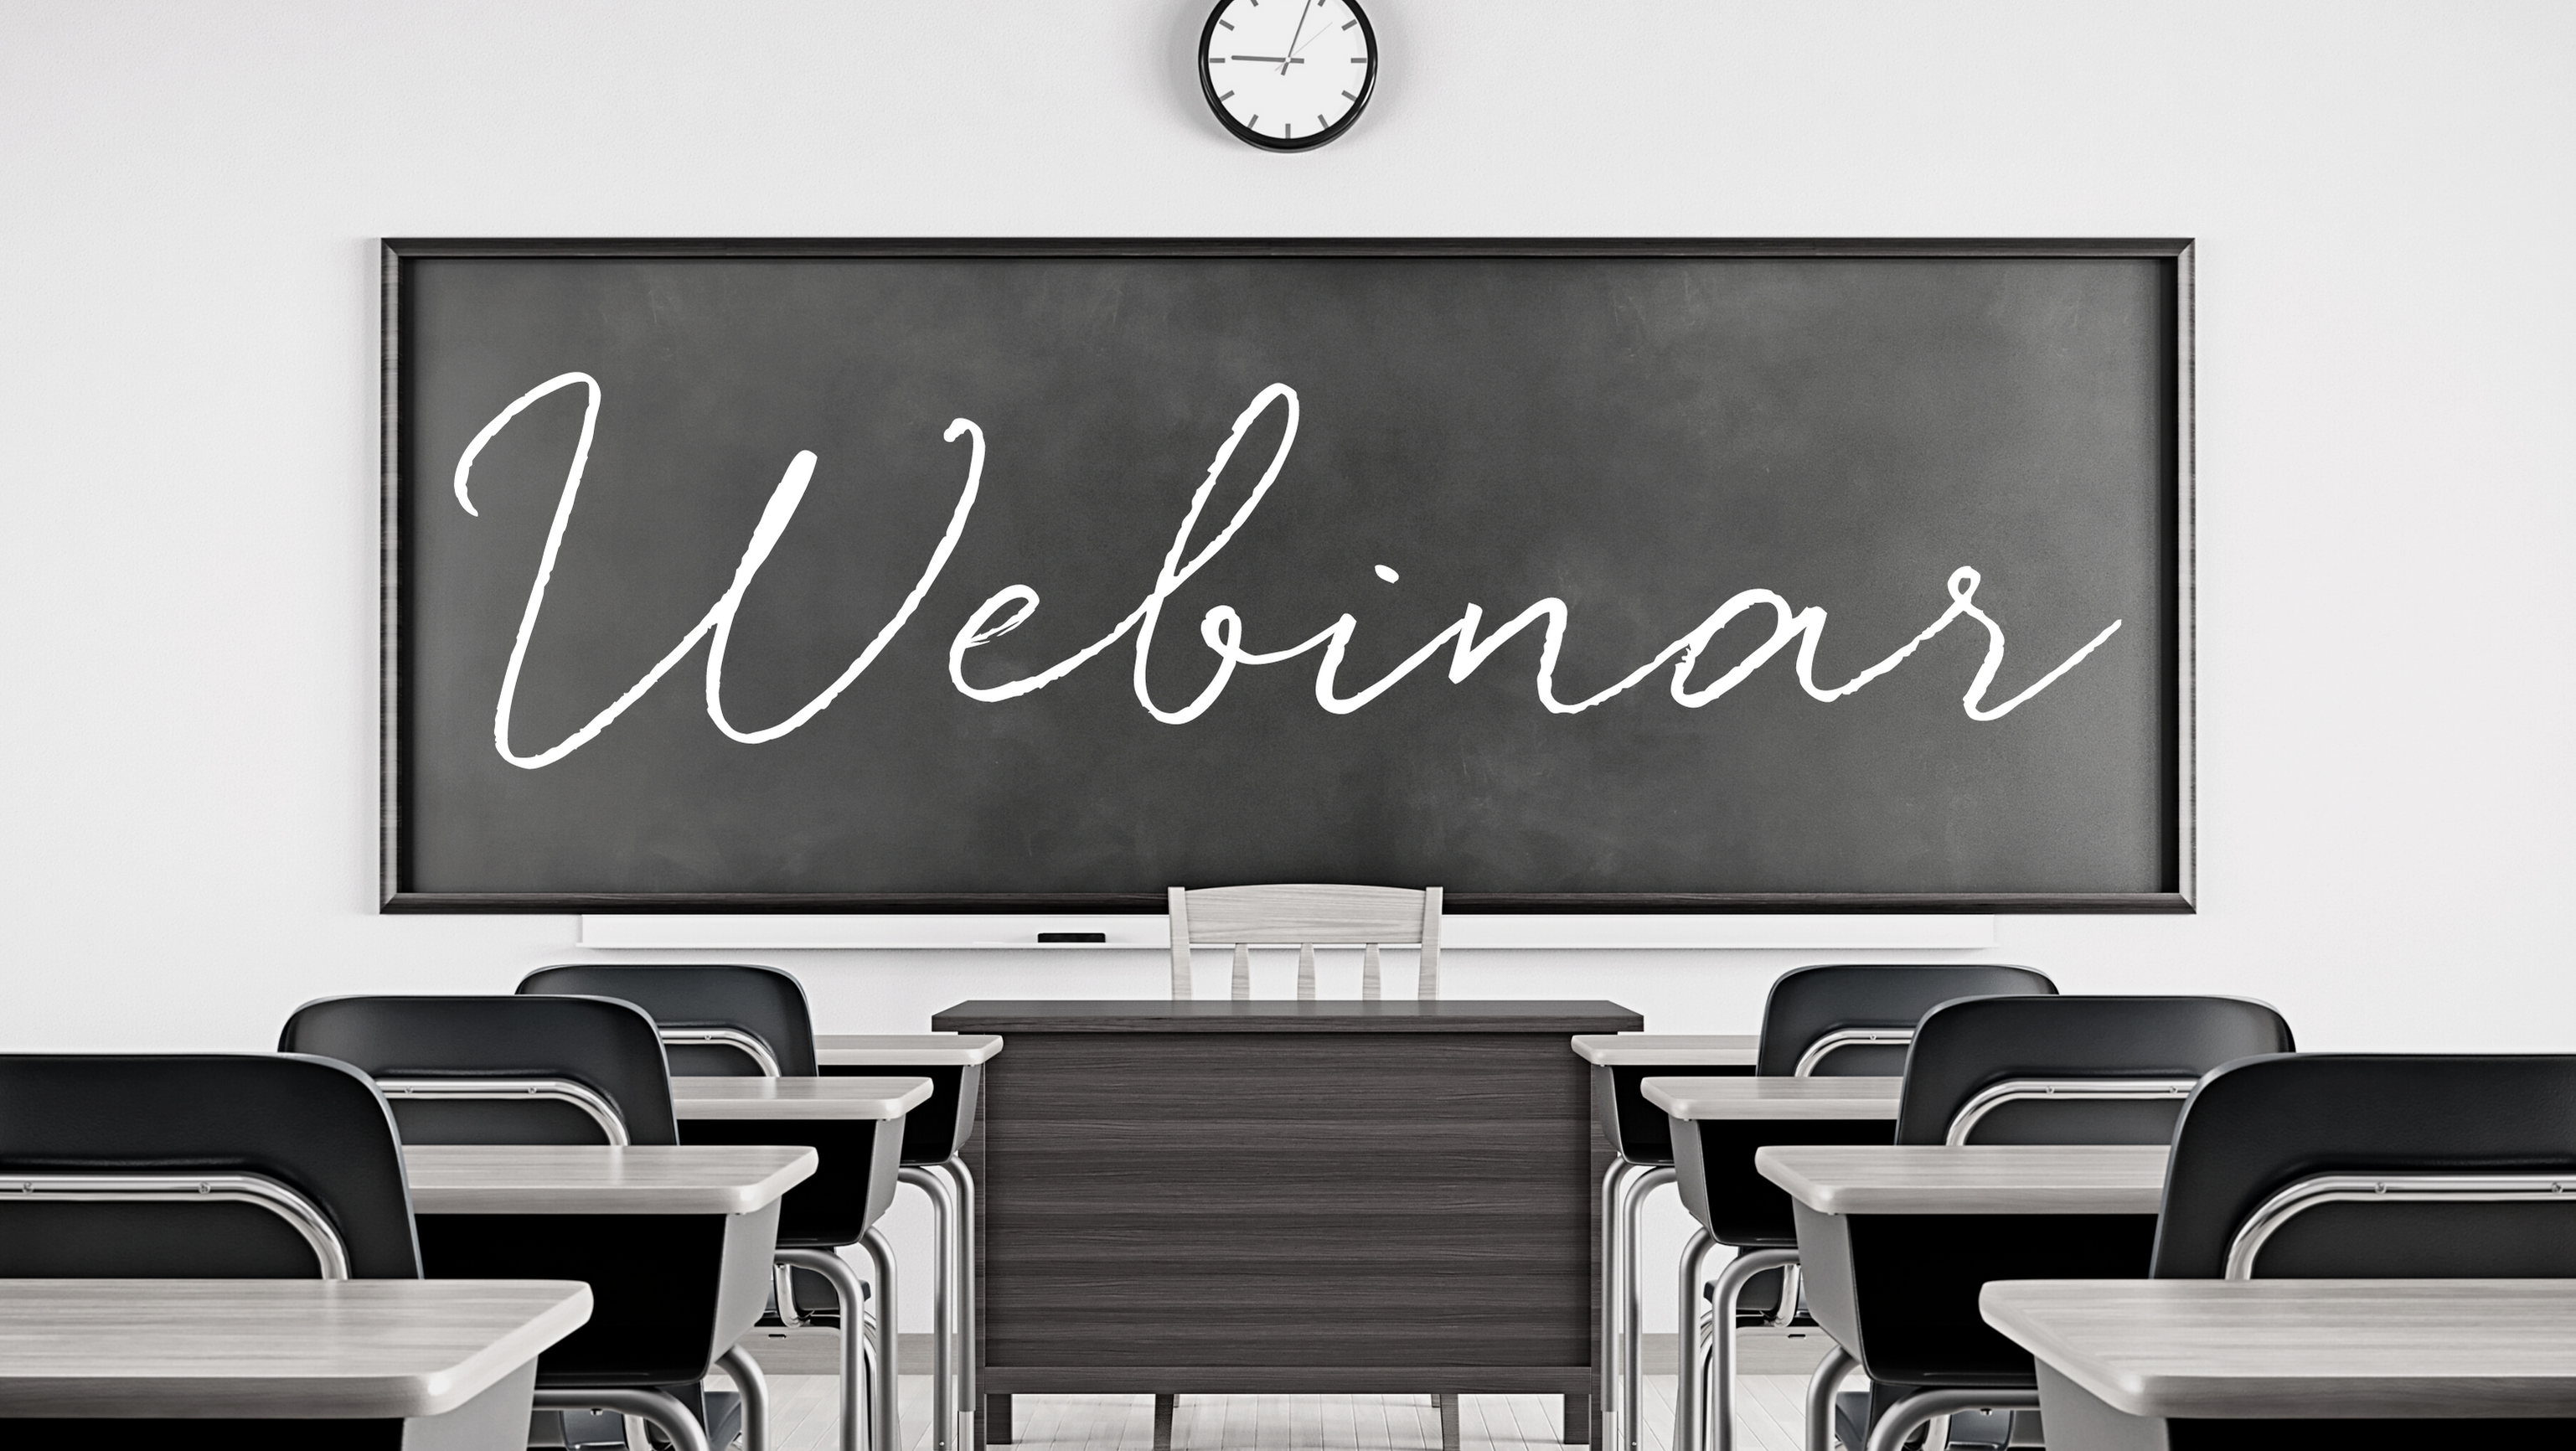 The Legal Department small business attorney webinars